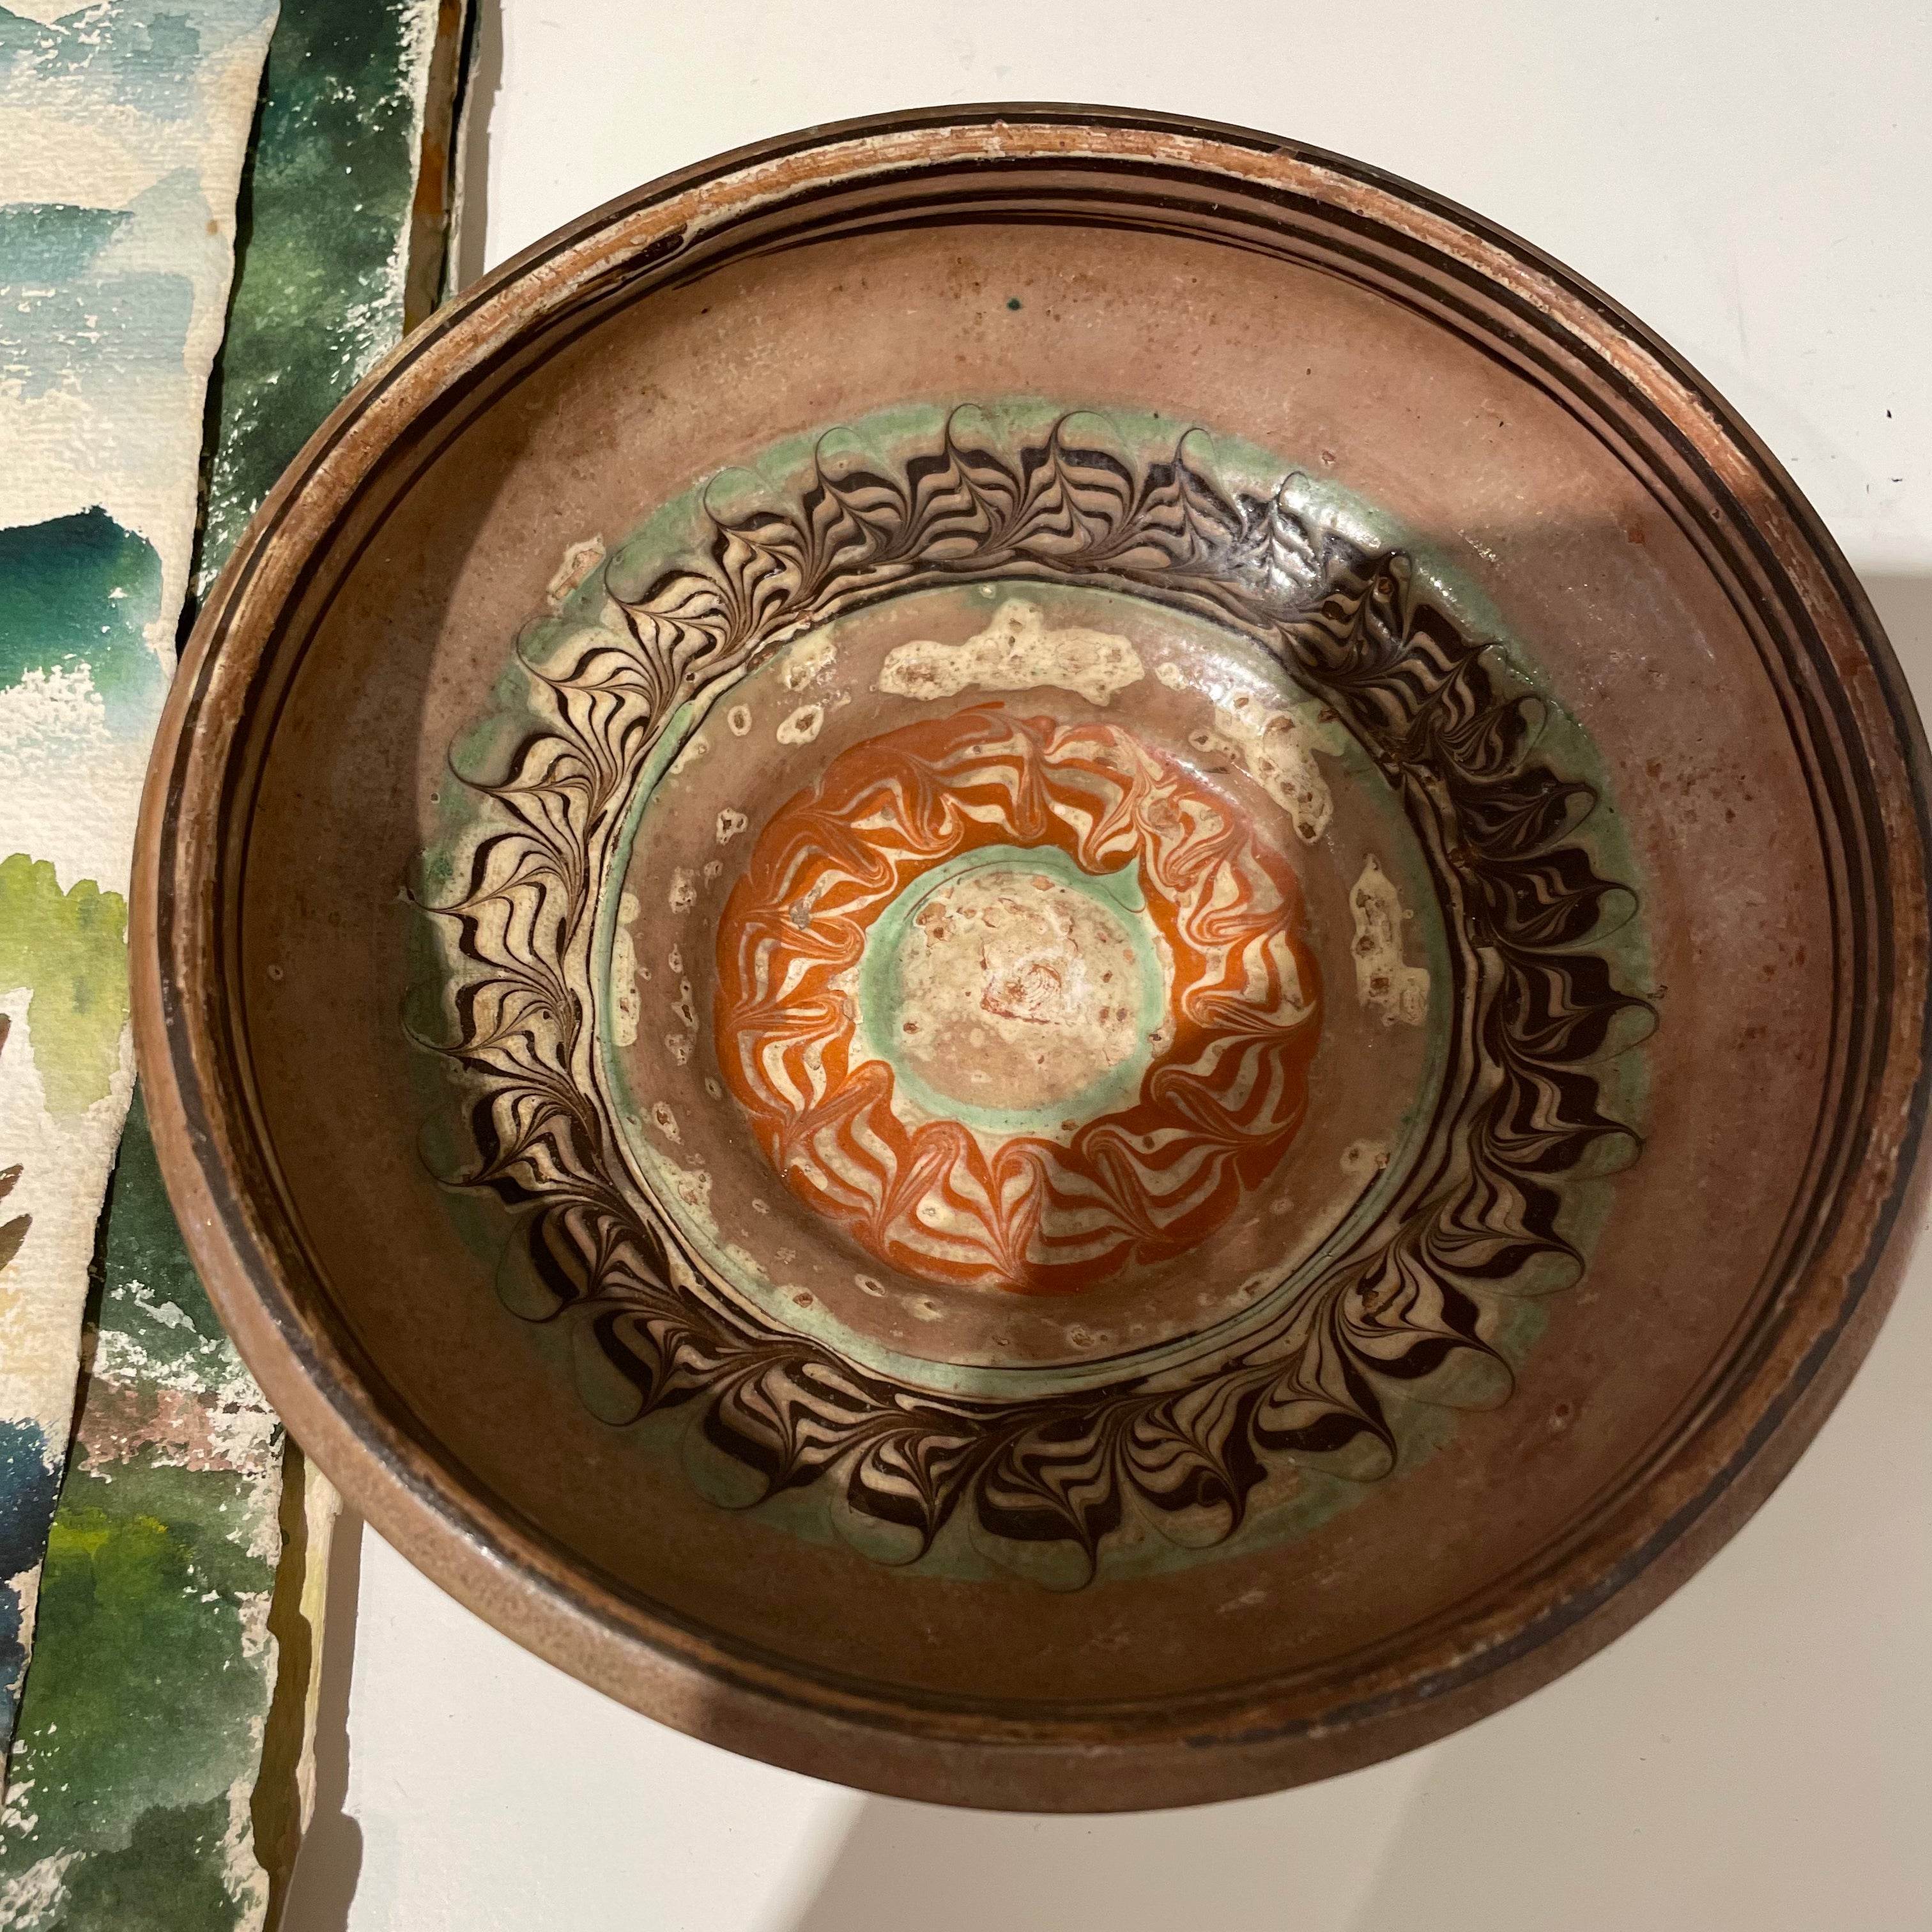 Found Painted Terracotta Decorative Bowls